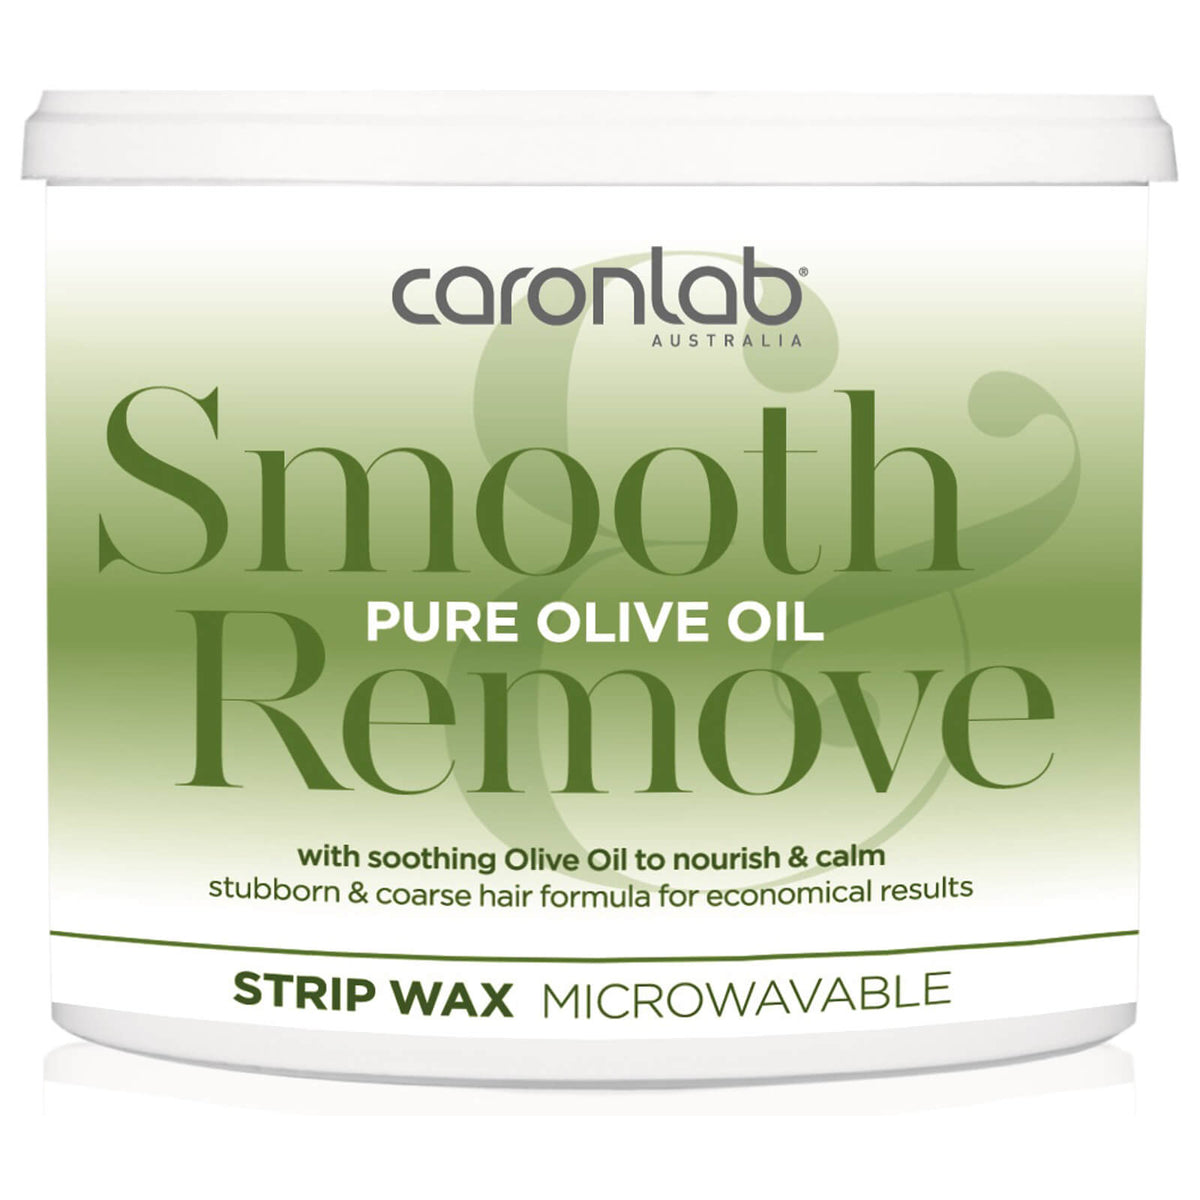 Caronlab Smooth And Remove Pure Olive Oil Strip Wax Microwaveable